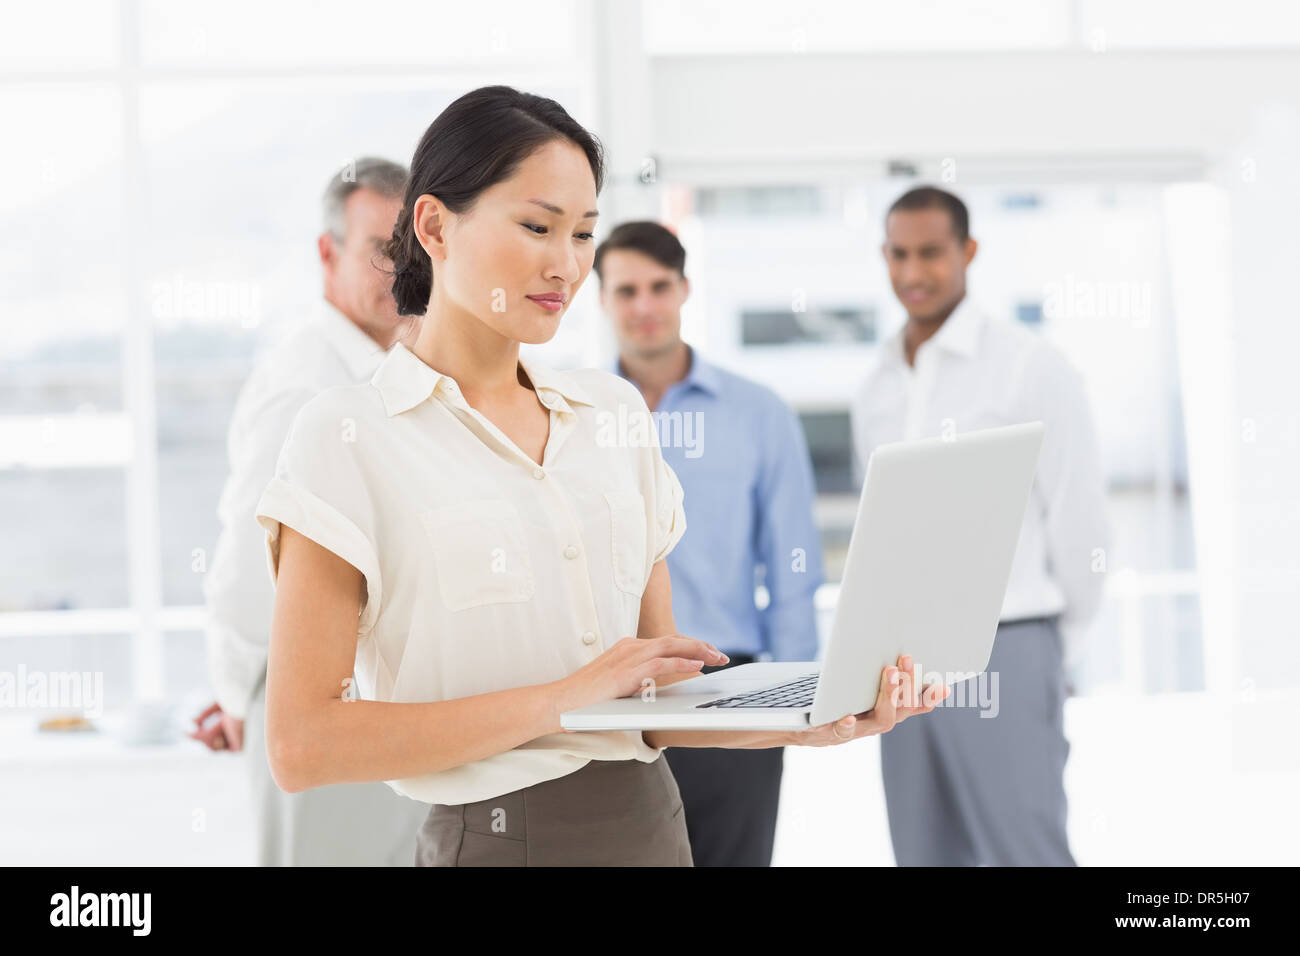 Pretty asian businesswoman using laptop with team behind her Stock Photo